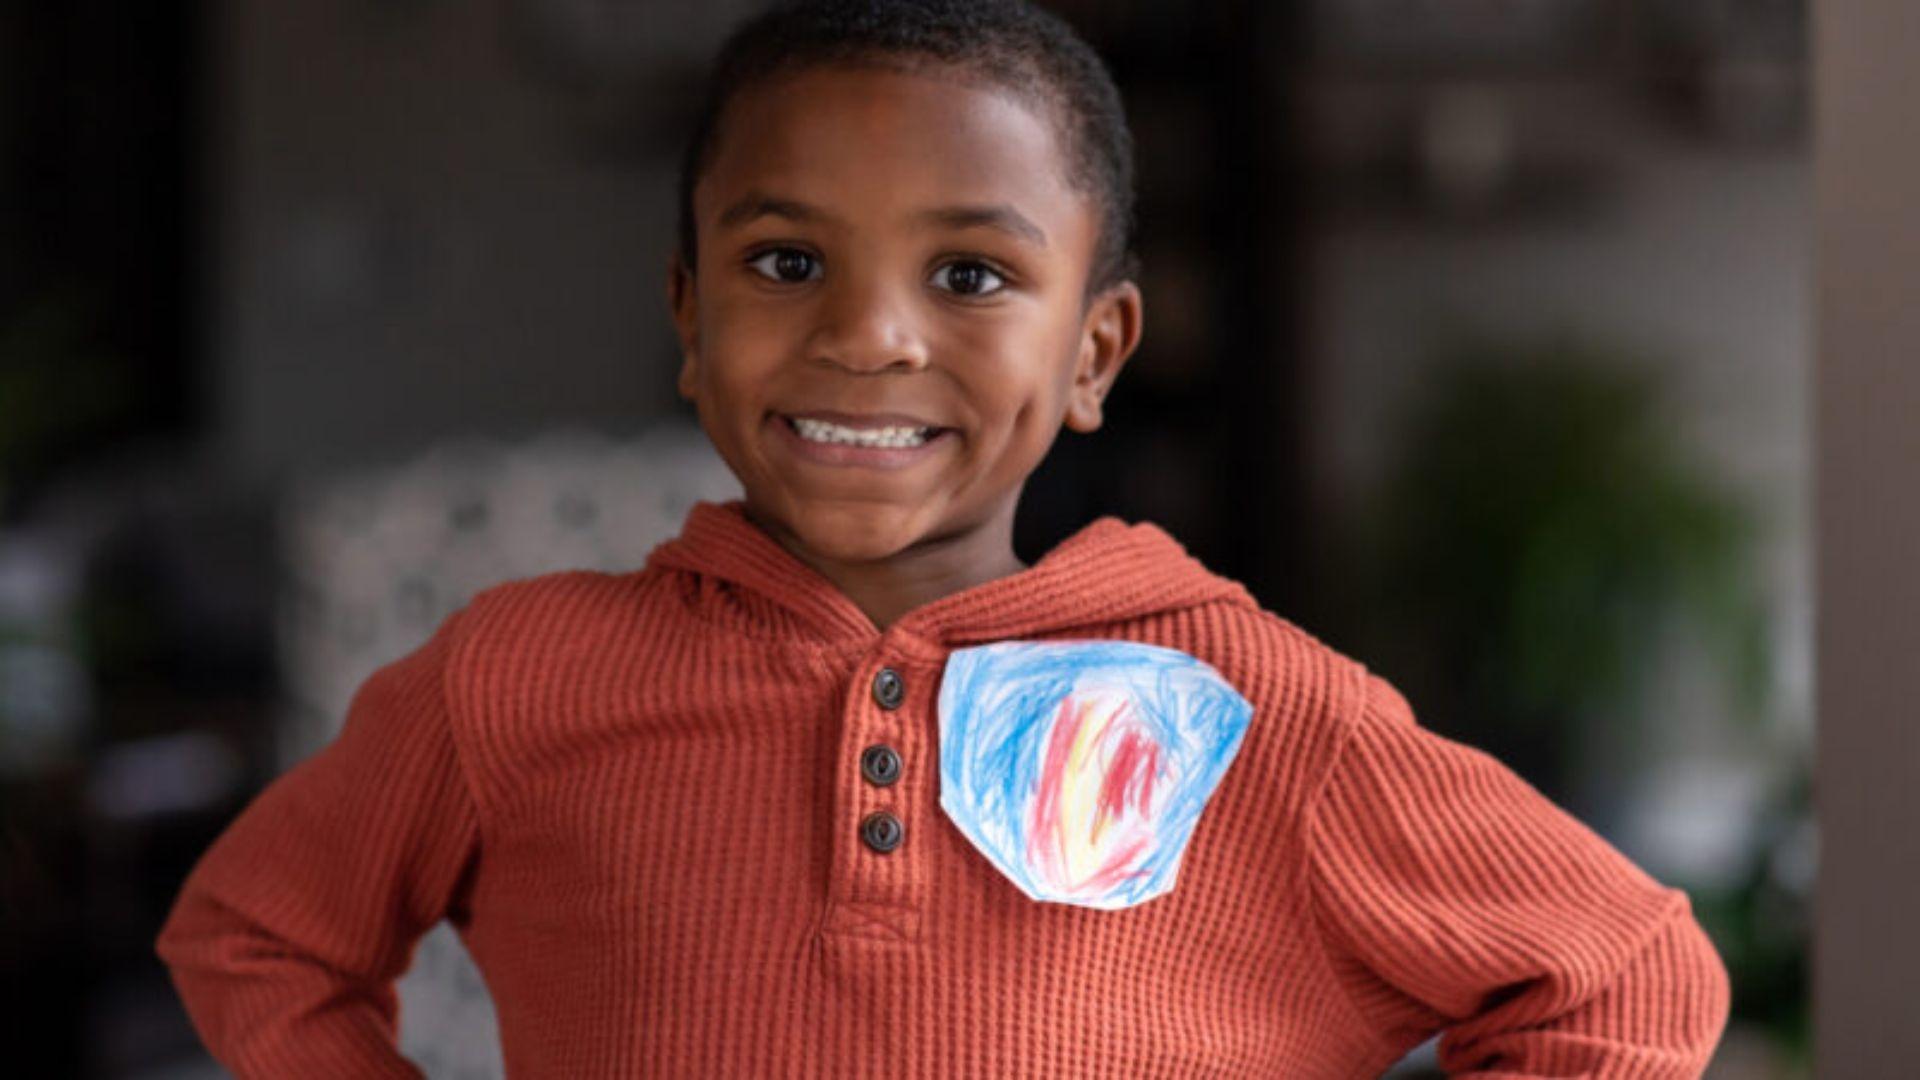 A Black boy smiling and wearing a craft as a pin on his shirt.